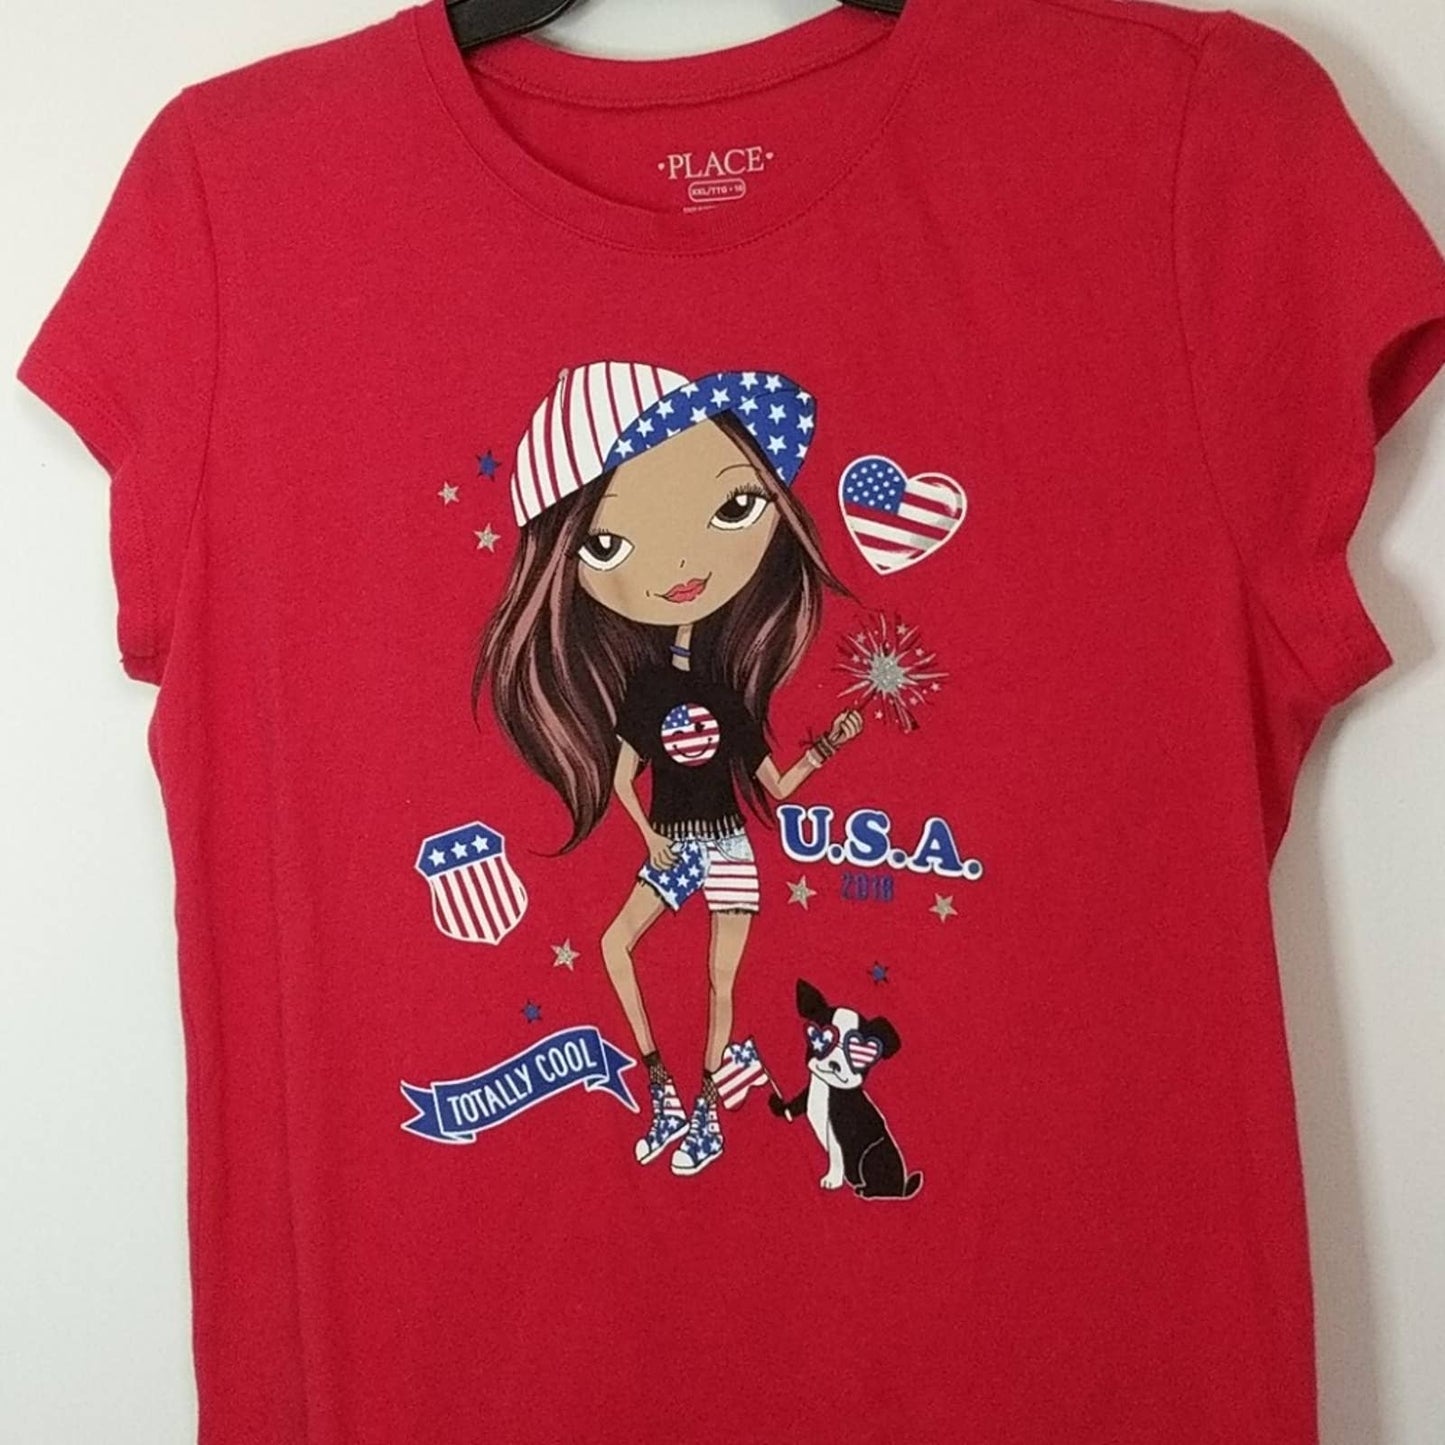 NEW THE CHILDREN'S PLACE Patriotic USA Flag Tee XXL 16